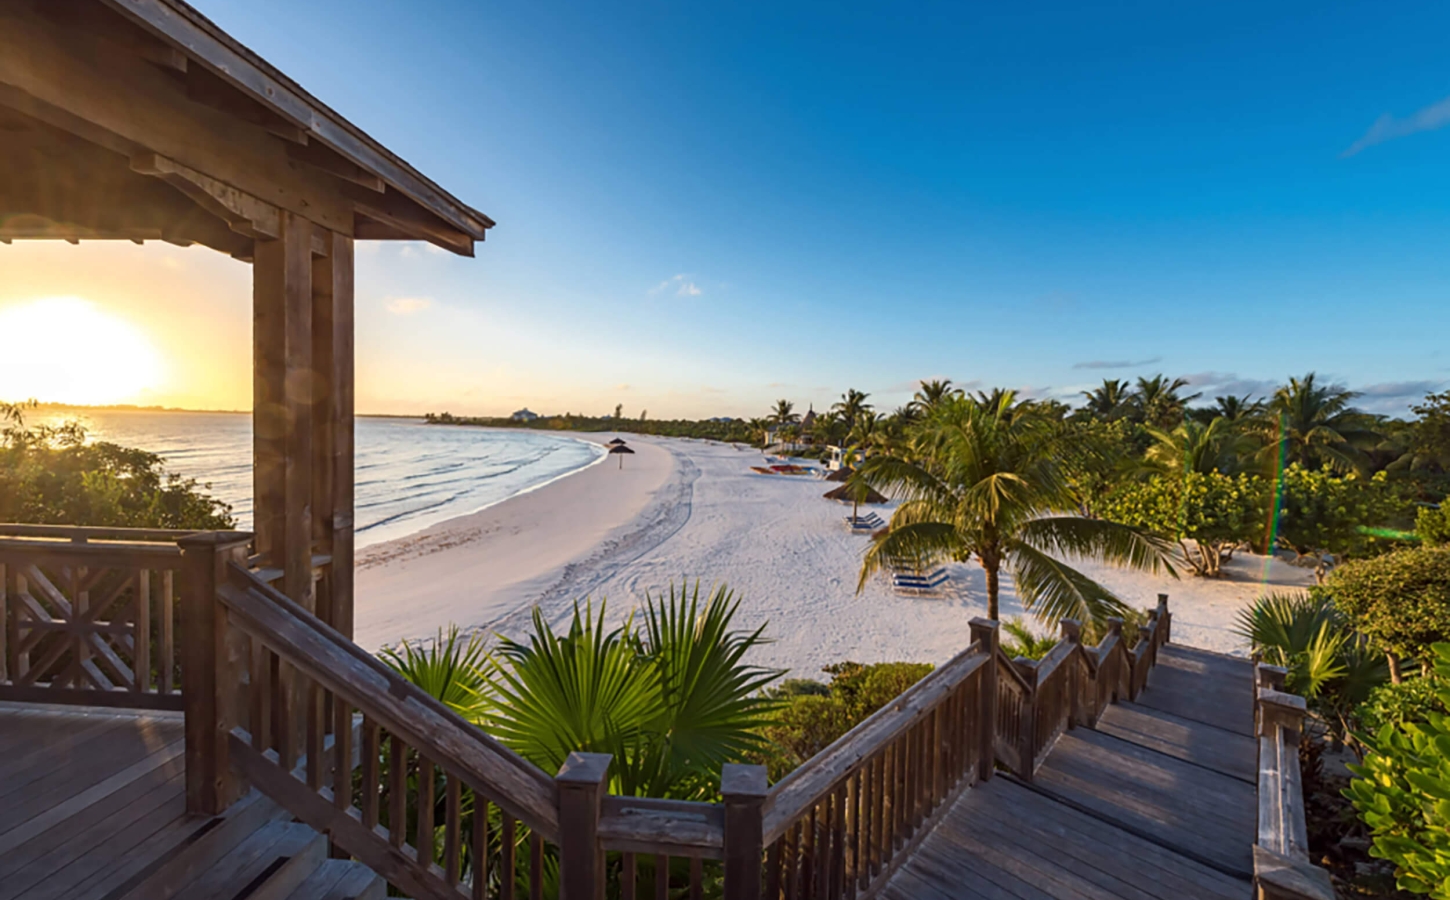 Golden sunset view from the steps leading to the beach at The Abaco Club, capturing the essence of coastal living in The Bahamas